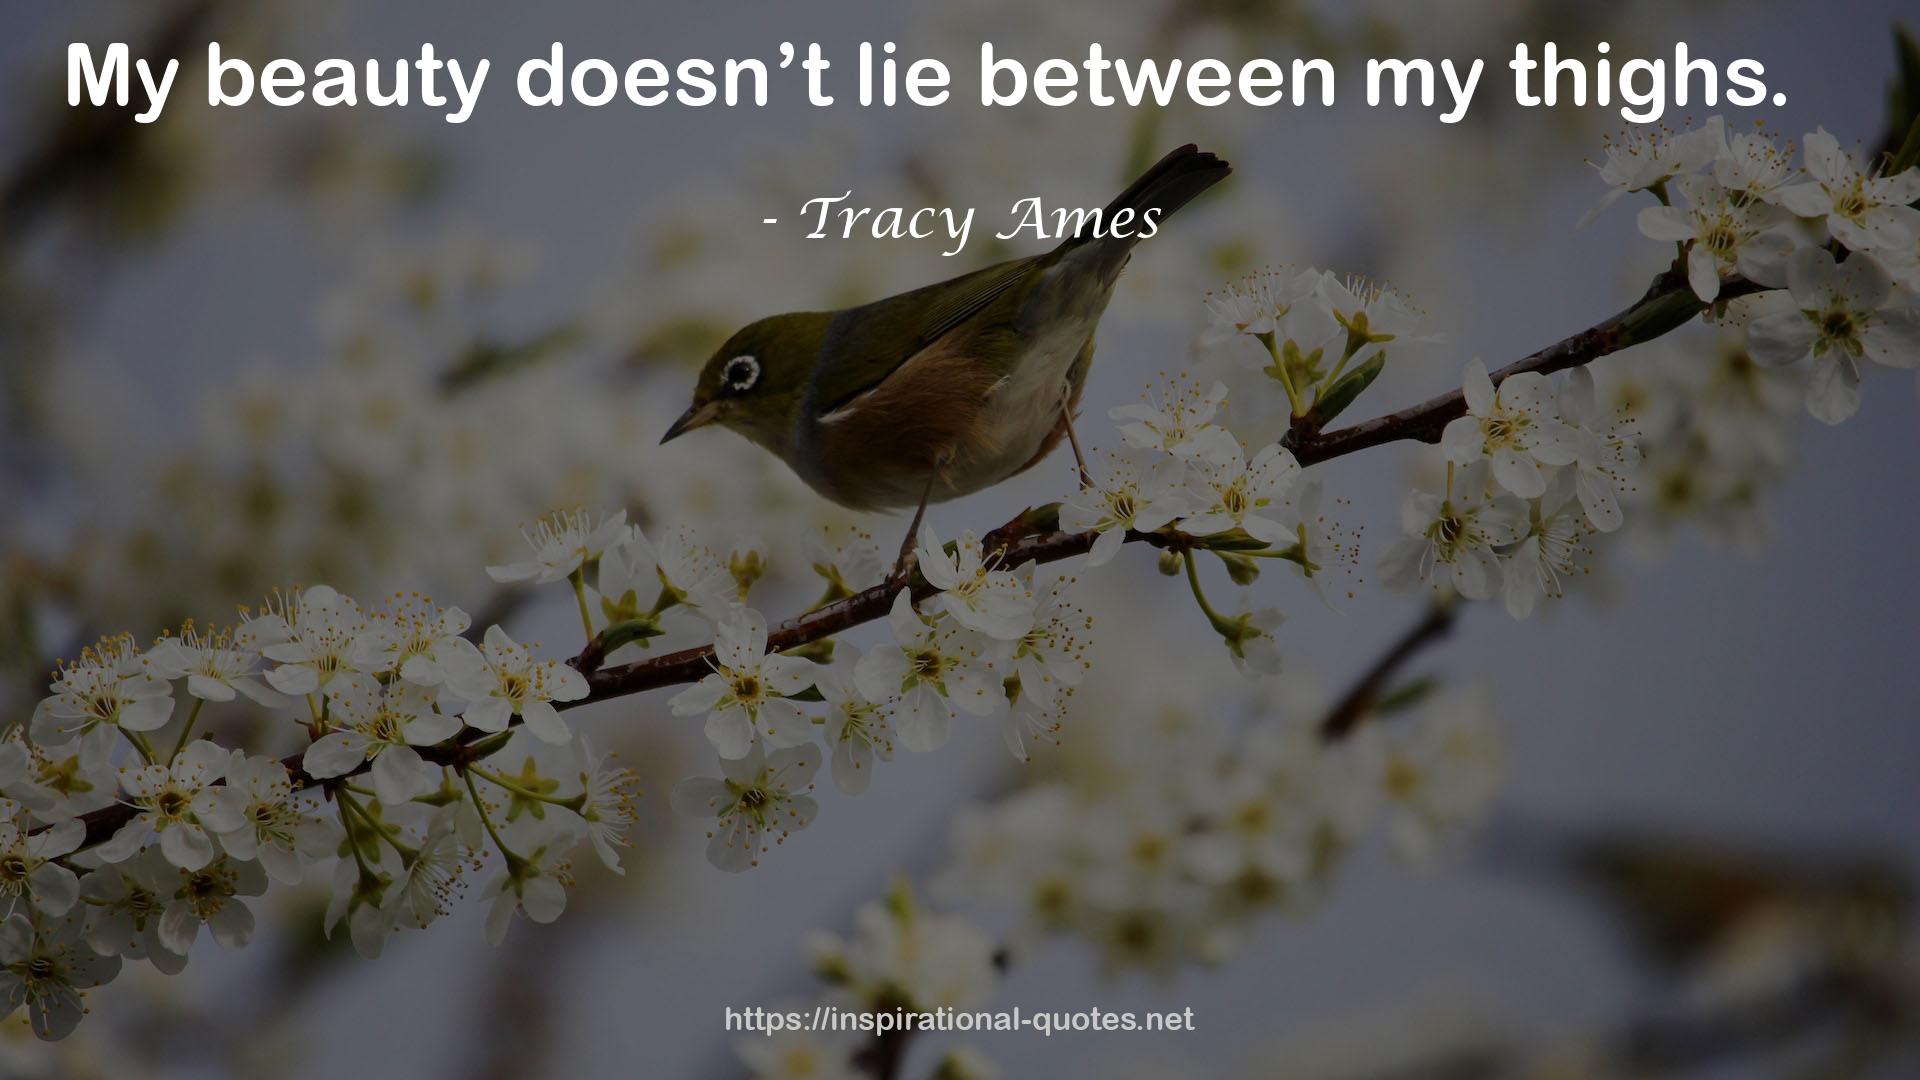 Tracy Ames QUOTES